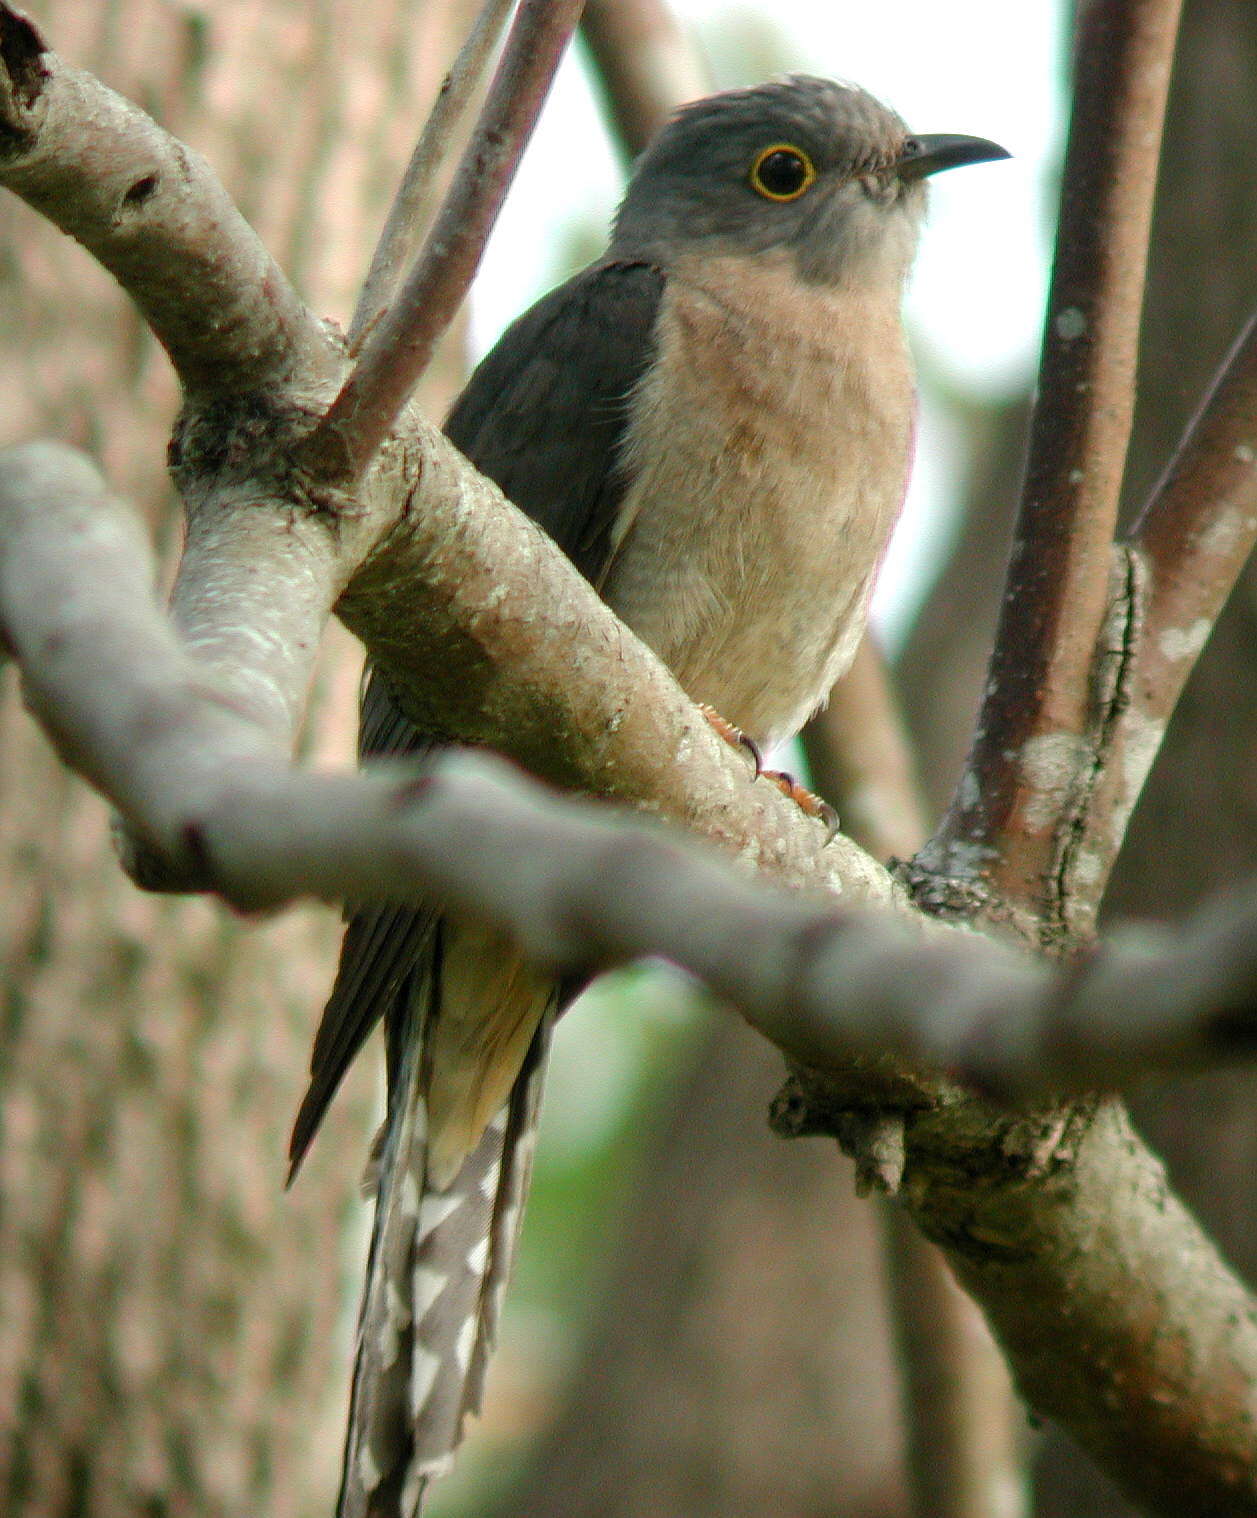 Image of Fan-tailed Cuckoo